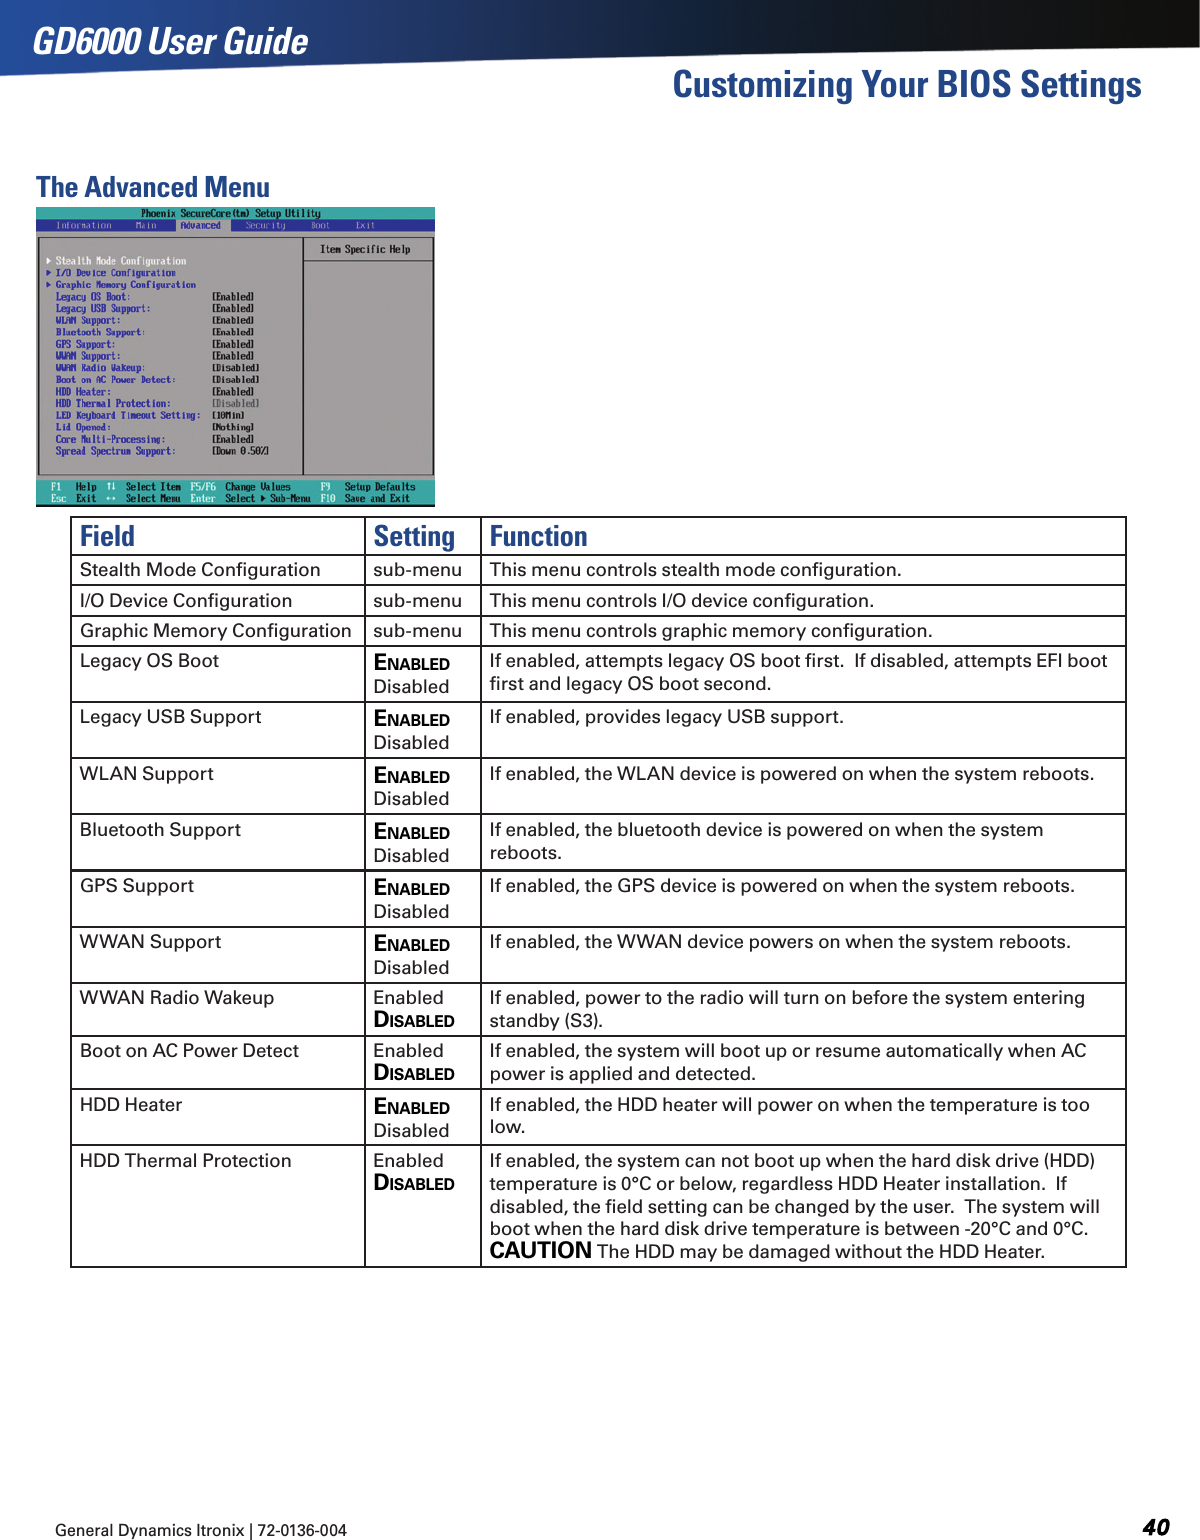 General Dynamics Itronix | 72-0136-004  GD6000 User GuideCustomizing Your BIOS SettingsThe Advanced MenuField Setting FunctionStealth Mode Conﬁguration sub-menu This menu controls stealth mode conﬁguration.I/O Device Conﬁguration sub-menu This menu controls I/O device conﬁguration.Graphic Memory Conﬁguration sub-menu This menu controls graphic memory conﬁguration.Legacy OS Boot enaBled  DisabledIf enabled, attempts legacy OS boot ﬁrst.  If disabled, attempts EFI boot ﬁrst and legacy OS boot second.Legacy USB Support enaBled  DisabledIf enabled, provides legacy USB support.WLAN Support enaBled  DisabledIf enabled, the WLAN device is powered on when the system reboots.Bluetooth Support enaBled DisabledIf enabled, the bluetooth device is powered on when the system reboots.GPS Support enaBled  DisabledIf enabled, the GPS device is powered on when the system reboots.WWAN Support enaBled  DisabledIf enabled, the WWAN device powers on when the system reboots.WWAN Radio Wakeup Enabled  disaBledIf enabled, power to the radio will turn on before the system entering standby (S3).Boot on AC Power Detect Enabled  disaBledIf enabled, the system will boot up or resume automatically when AC power is applied and detected.HDD Heater enaBled  DisabledIf enabled, the HDD heater will power on when the temperature is too low.HDD Thermal Protection Enabled  disaBledIf enabled, the system can not boot up when the hard disk drive (HDD) temperature is 0°C or below, regardless HDD Heater installation.  If disabled, the ﬁeld setting can be changed by the user.  The system will boot when the hard disk drive temperature is between -20°C and 0°C.   Caution The HDD may be damaged without the HDD Heater.